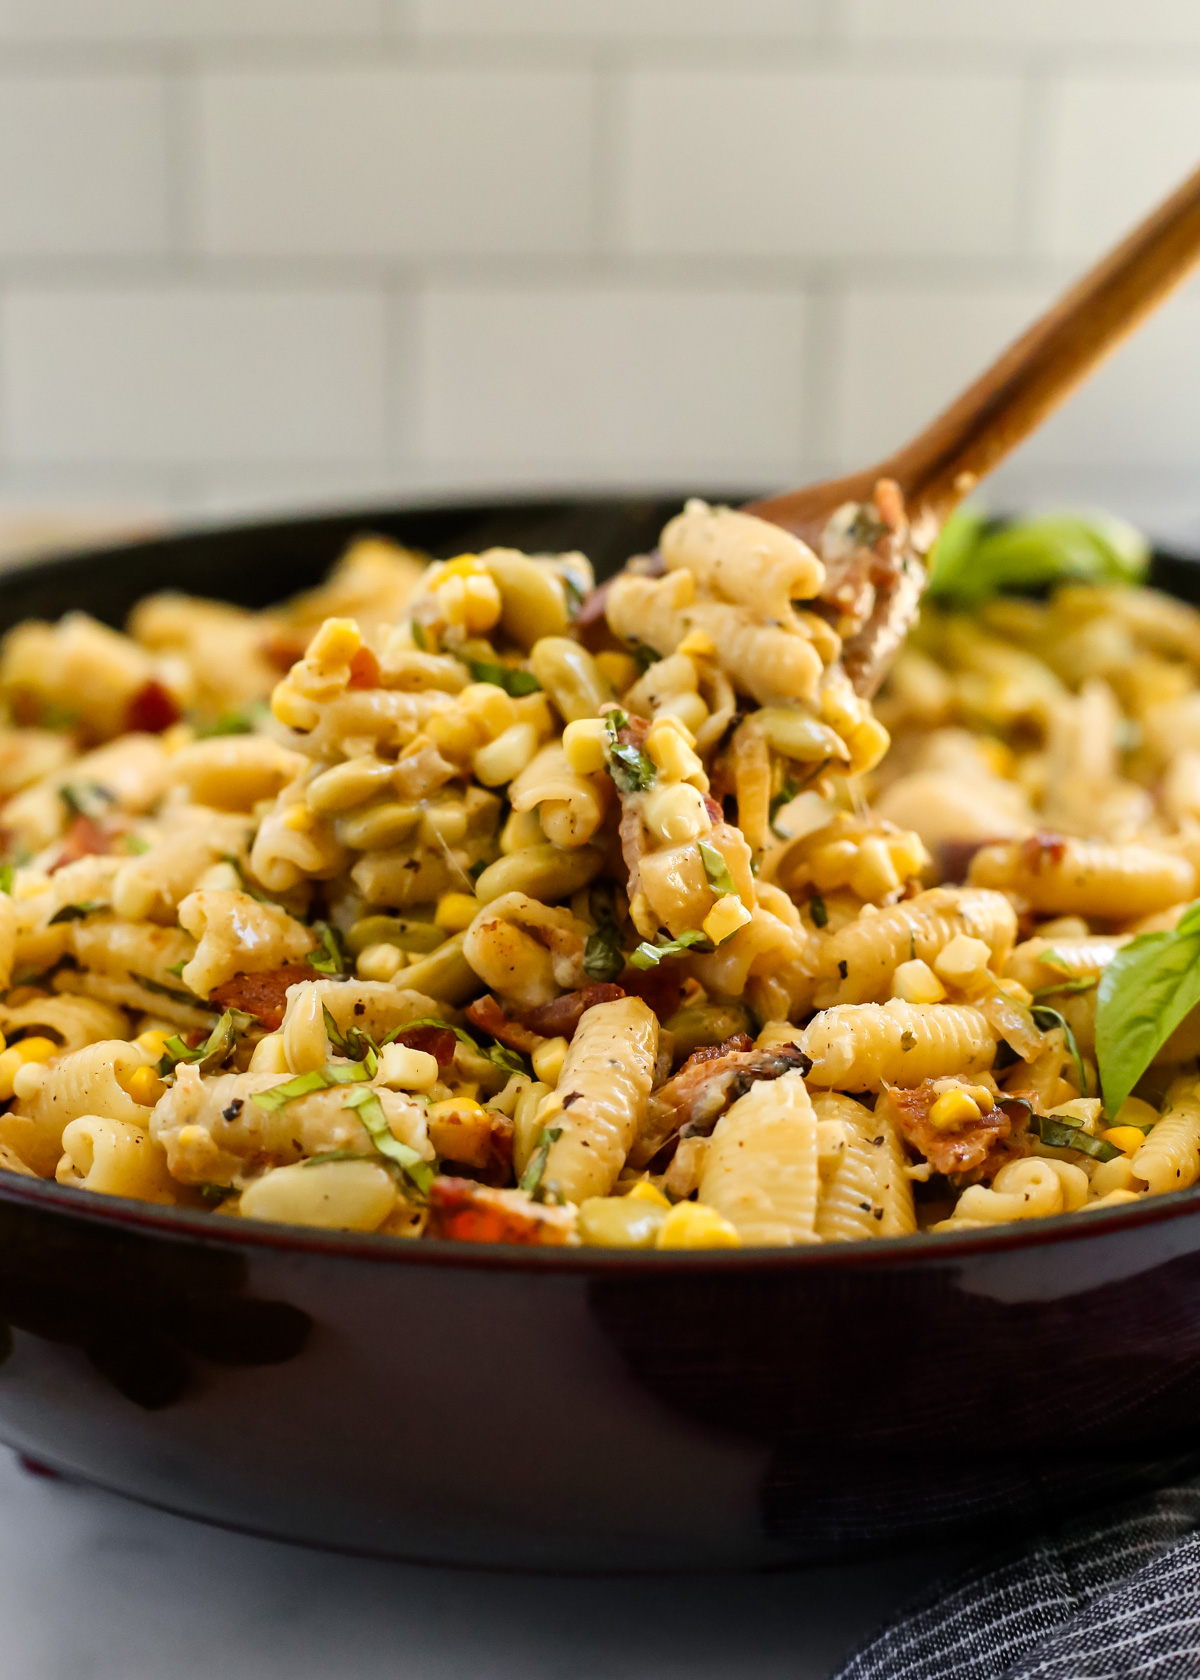 A wooden serving spoon lifts a heaping spoonful of a creamy corn pasta out of a braising dish filled to the brim with a saucy creamy pasta with visible chunks of bacon, fresh basil, and black peppers